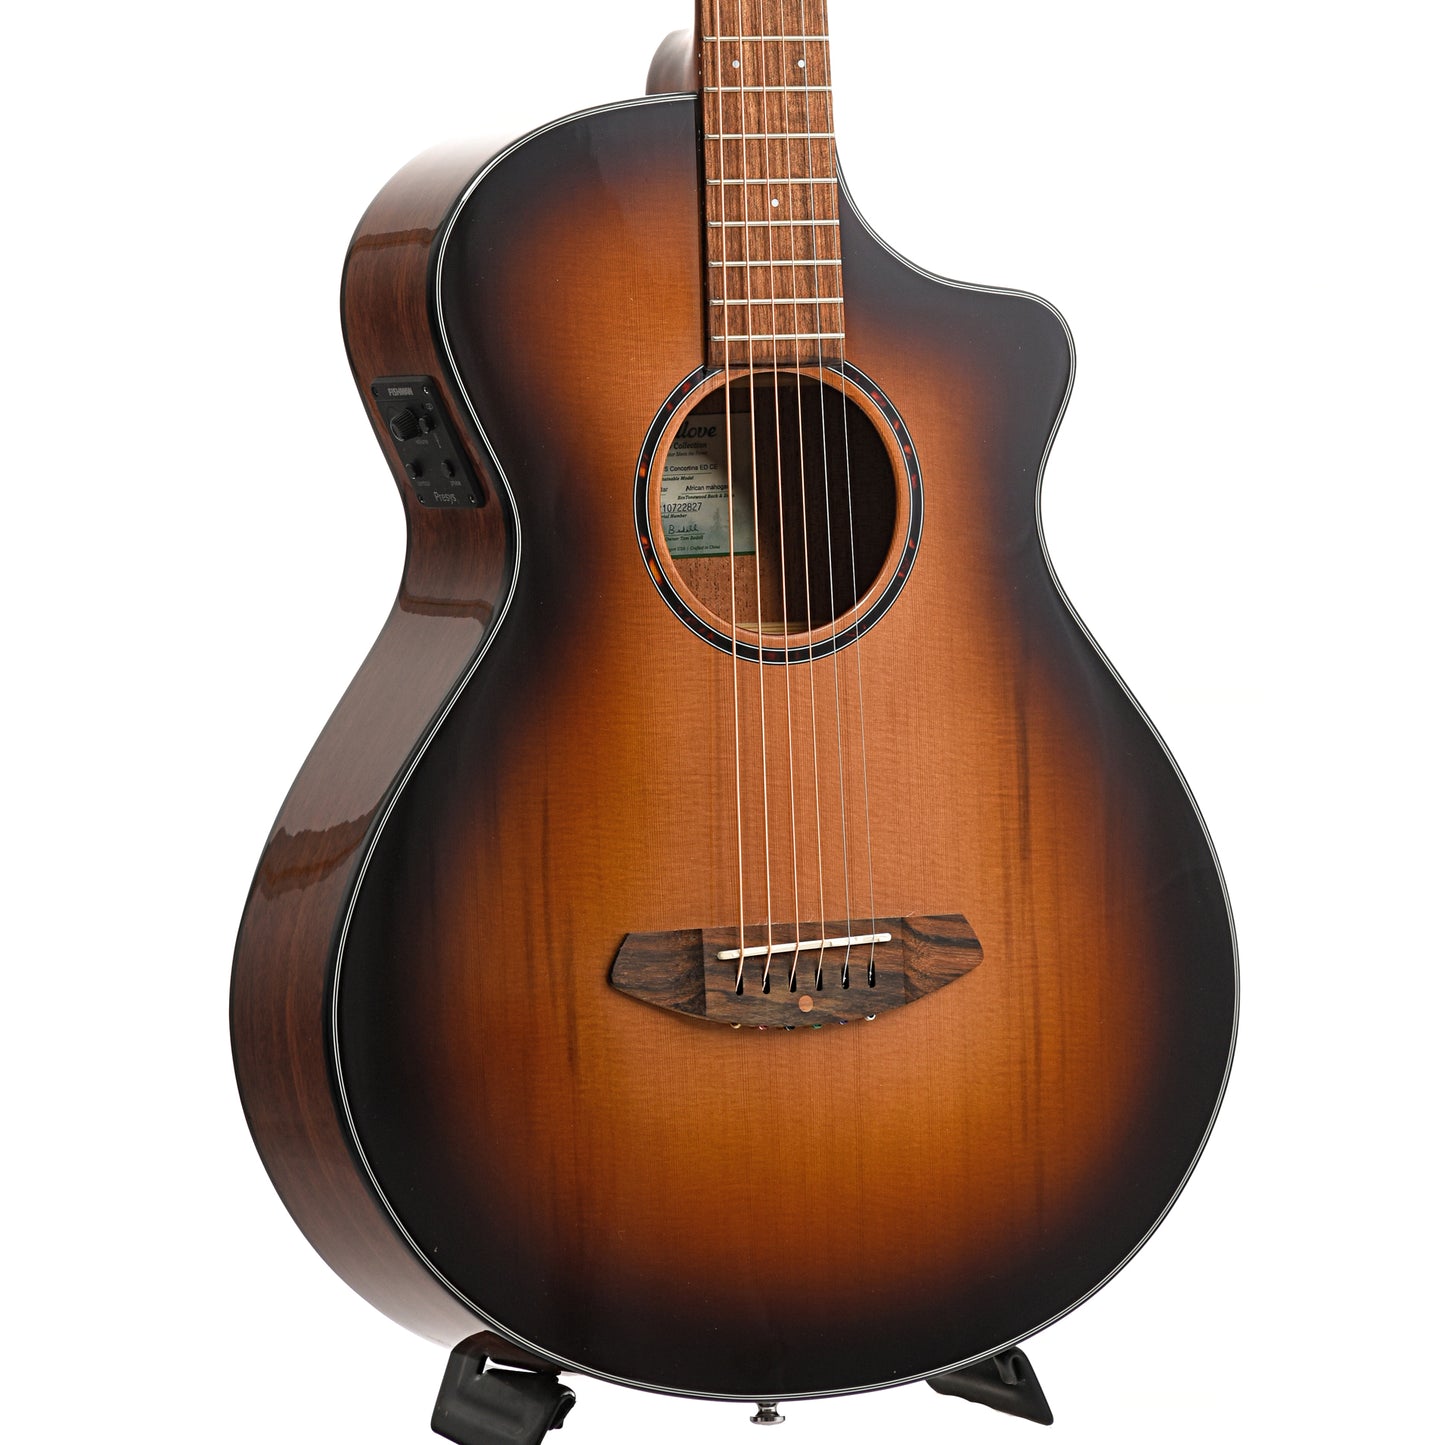 Image 3 of Breedlove Discovery S Concertina Edgeburst CE Red Cedar-African Mahogany Acoustic-Electric Guitar - SKU# DSCA44CERCAM : Product Type Flat-top Guitars : Elderly Instruments